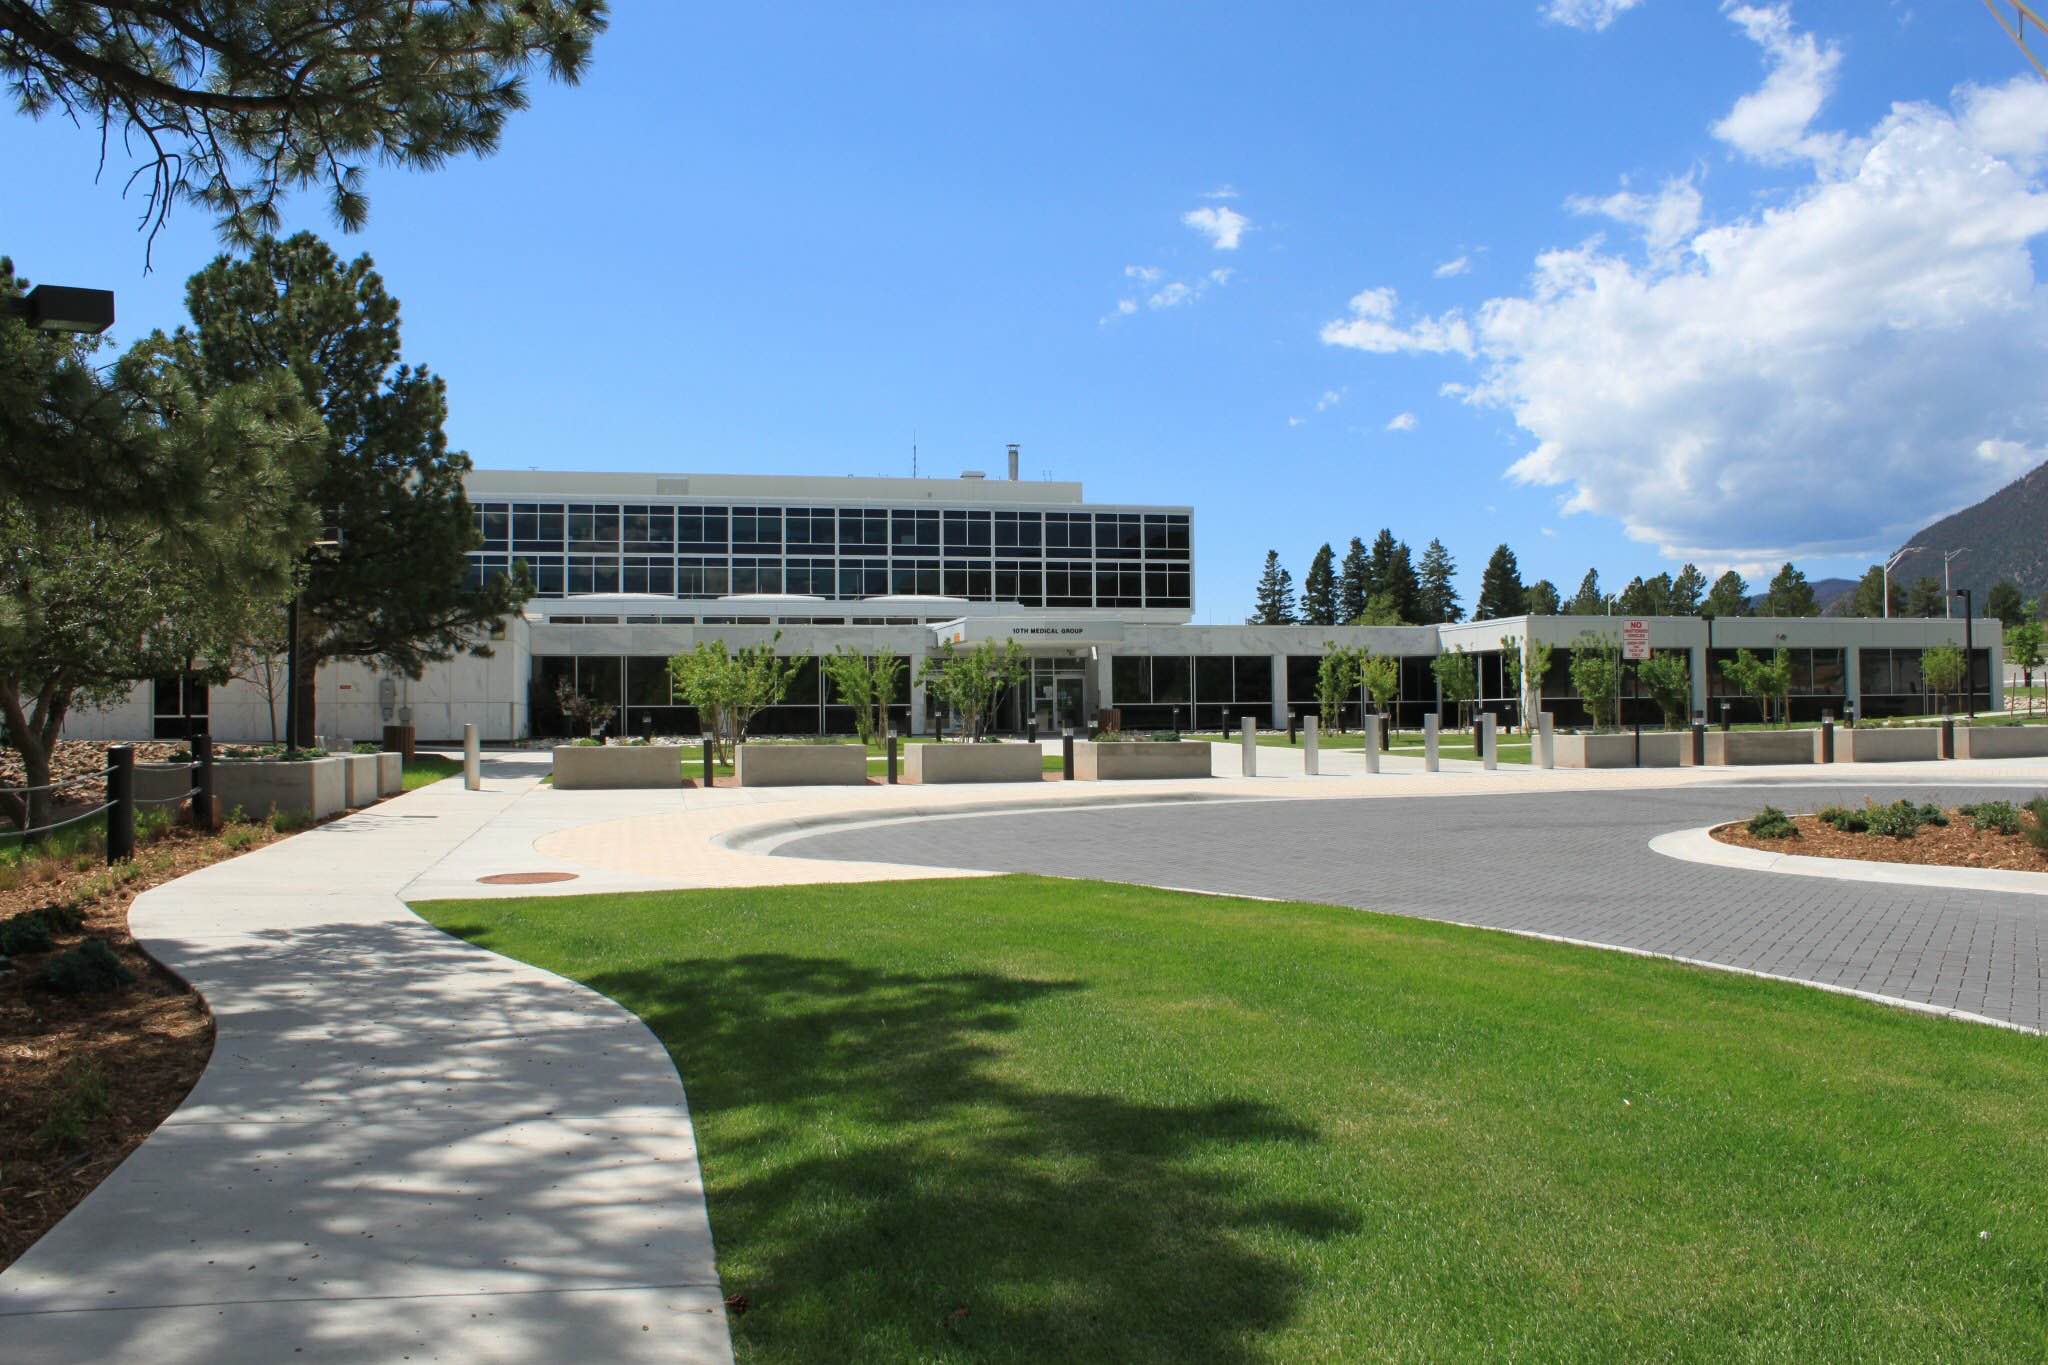 Image of the United States Air Force Academy